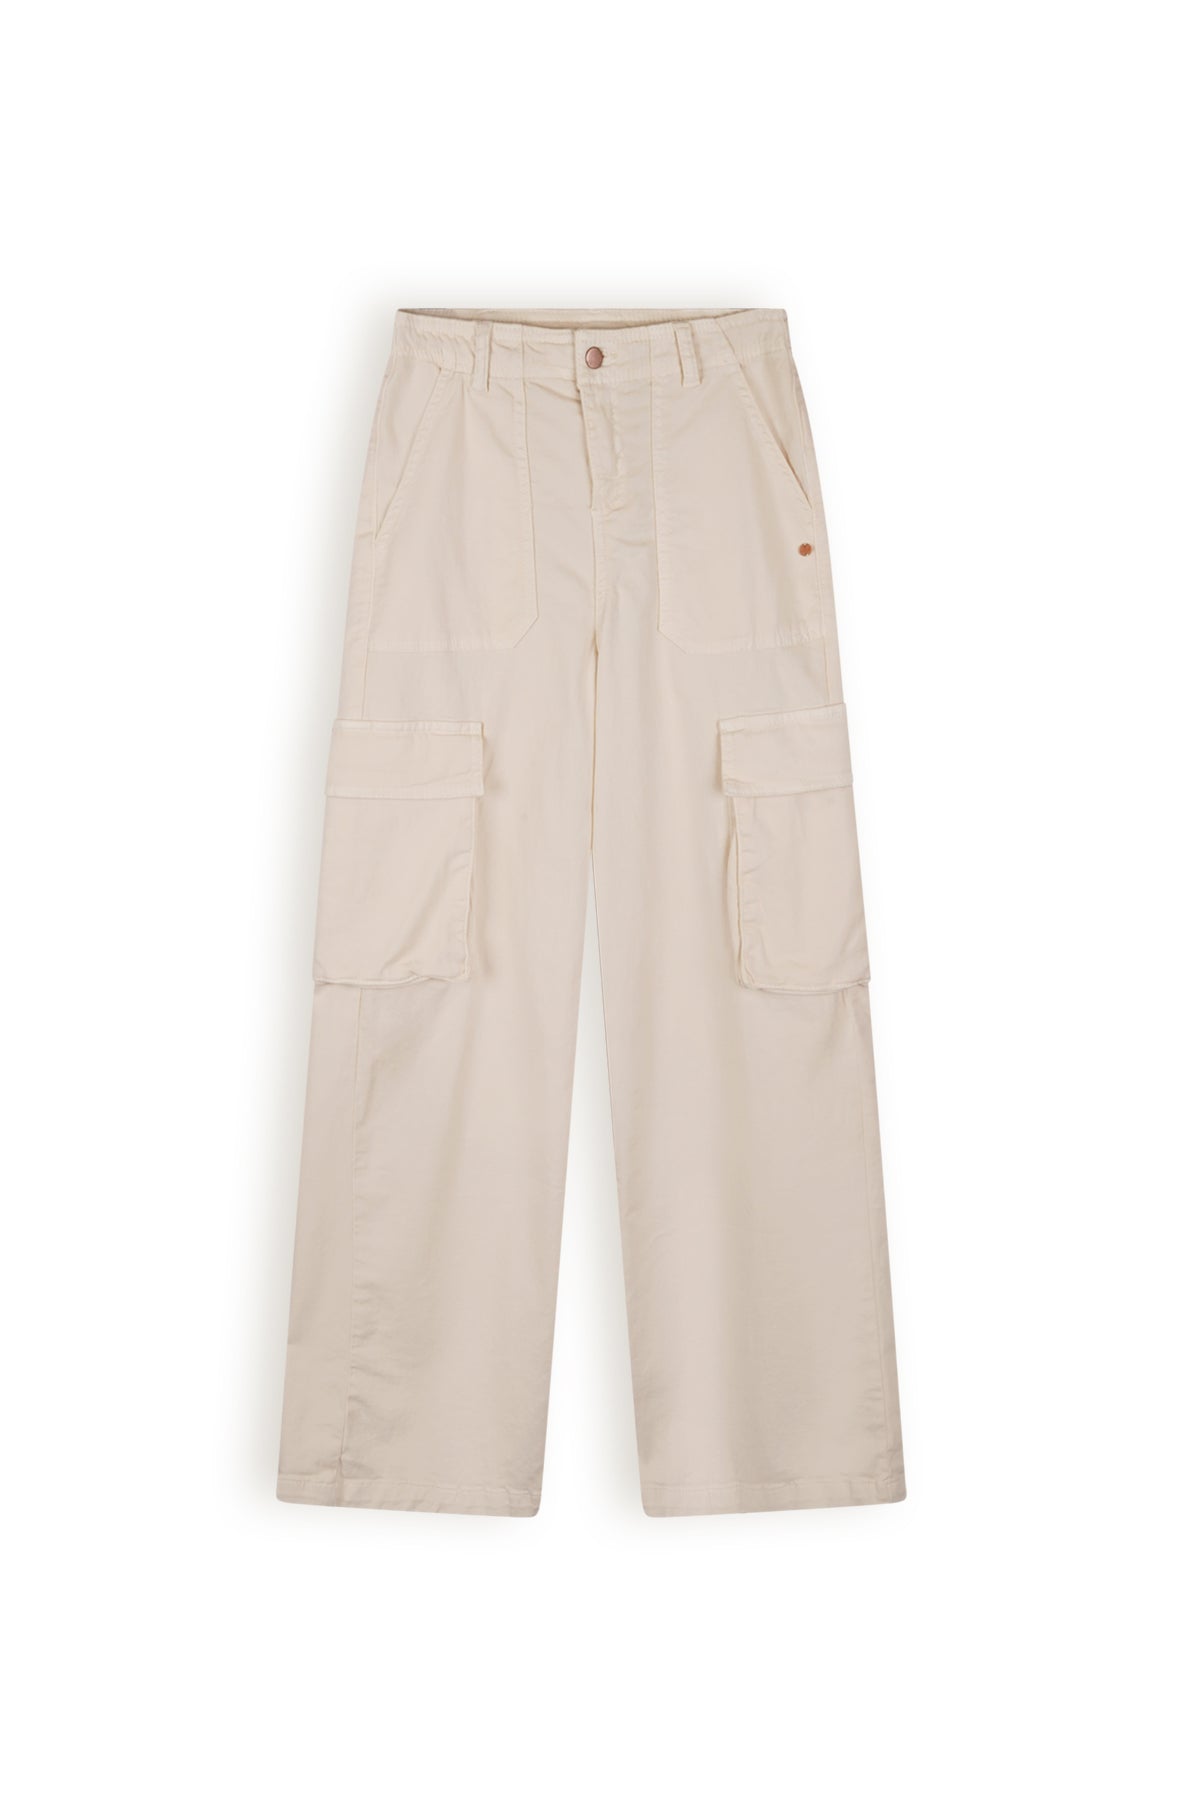 NoBell Susy Garment Dyed Stretch Twill Cargo Pants